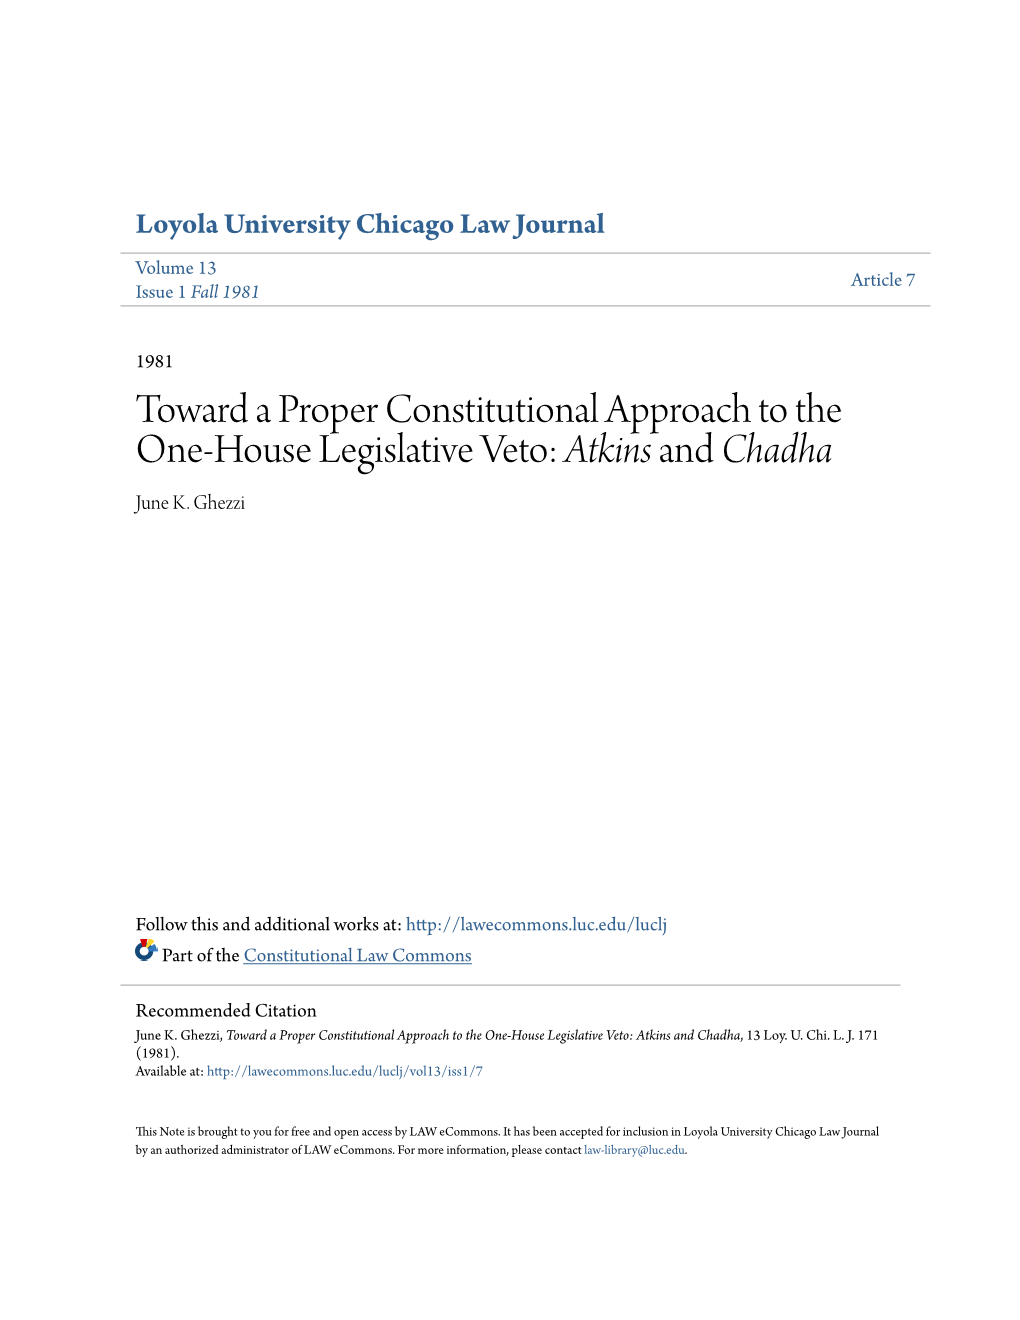 Toward a Proper Constitutional Approach to the One-House Legislative Veto: Atkins and Chadha June K